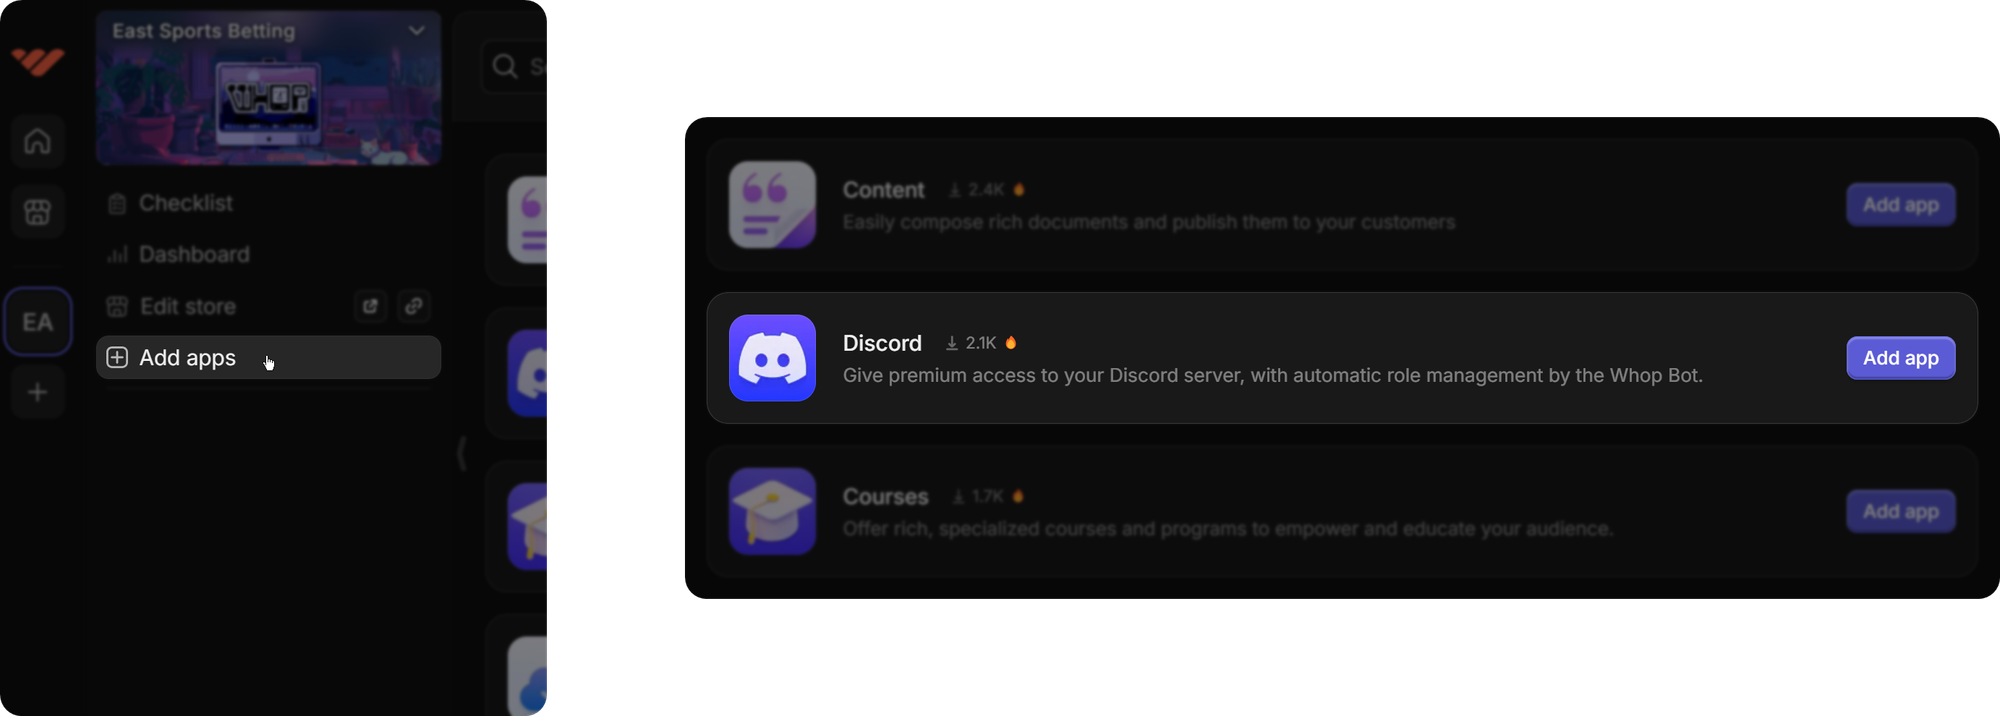 The "Add apps" button on the Whop Hub and the Discord app on Whop